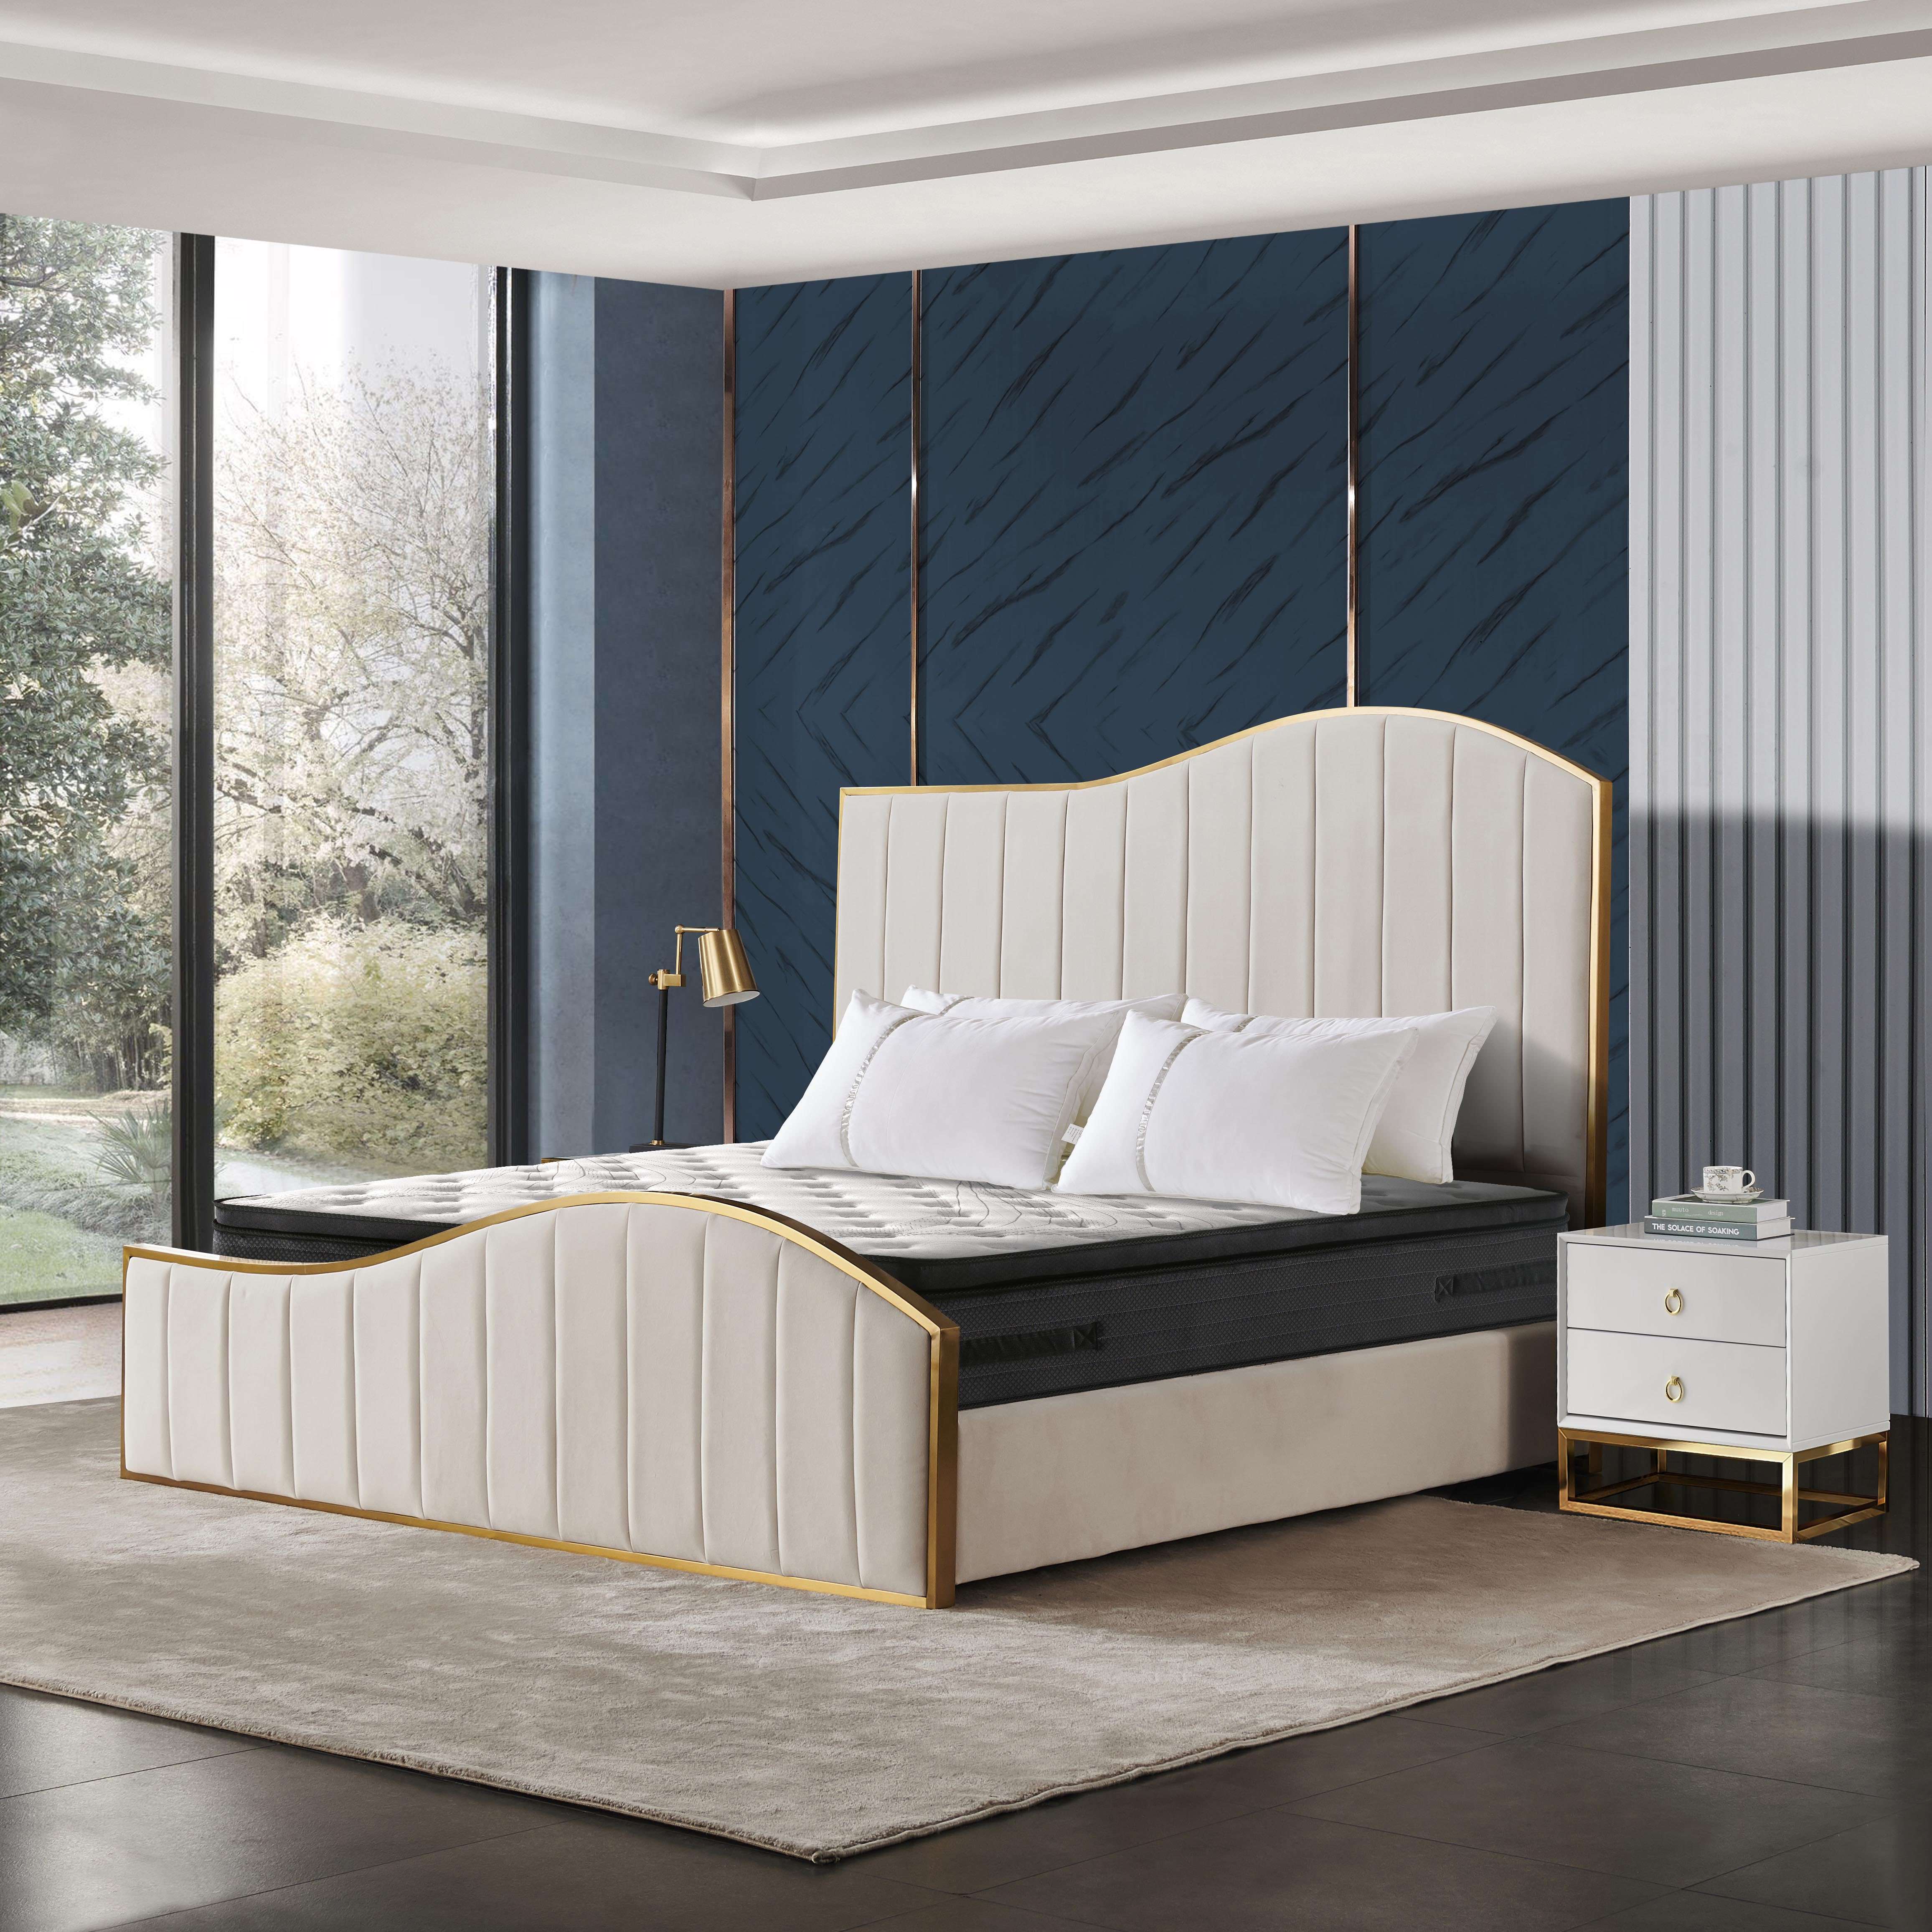 Who Has Bedroom Furniture In Stock?